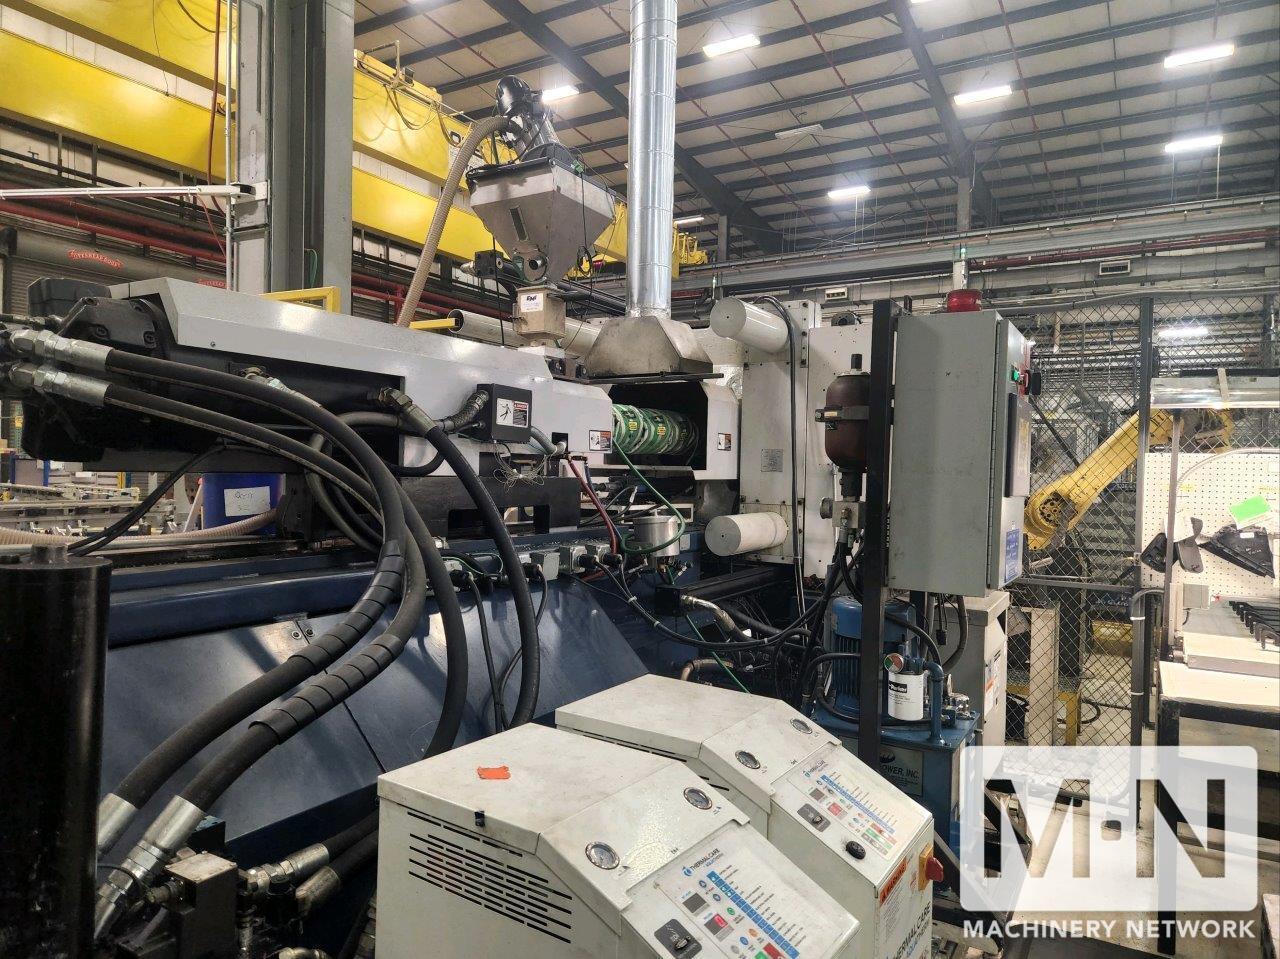 2004 DEMAG CALIBER 500-1920 INJECTION MOLDING, HORIZONTAL/VERTICAL | Machinery Network Inc.